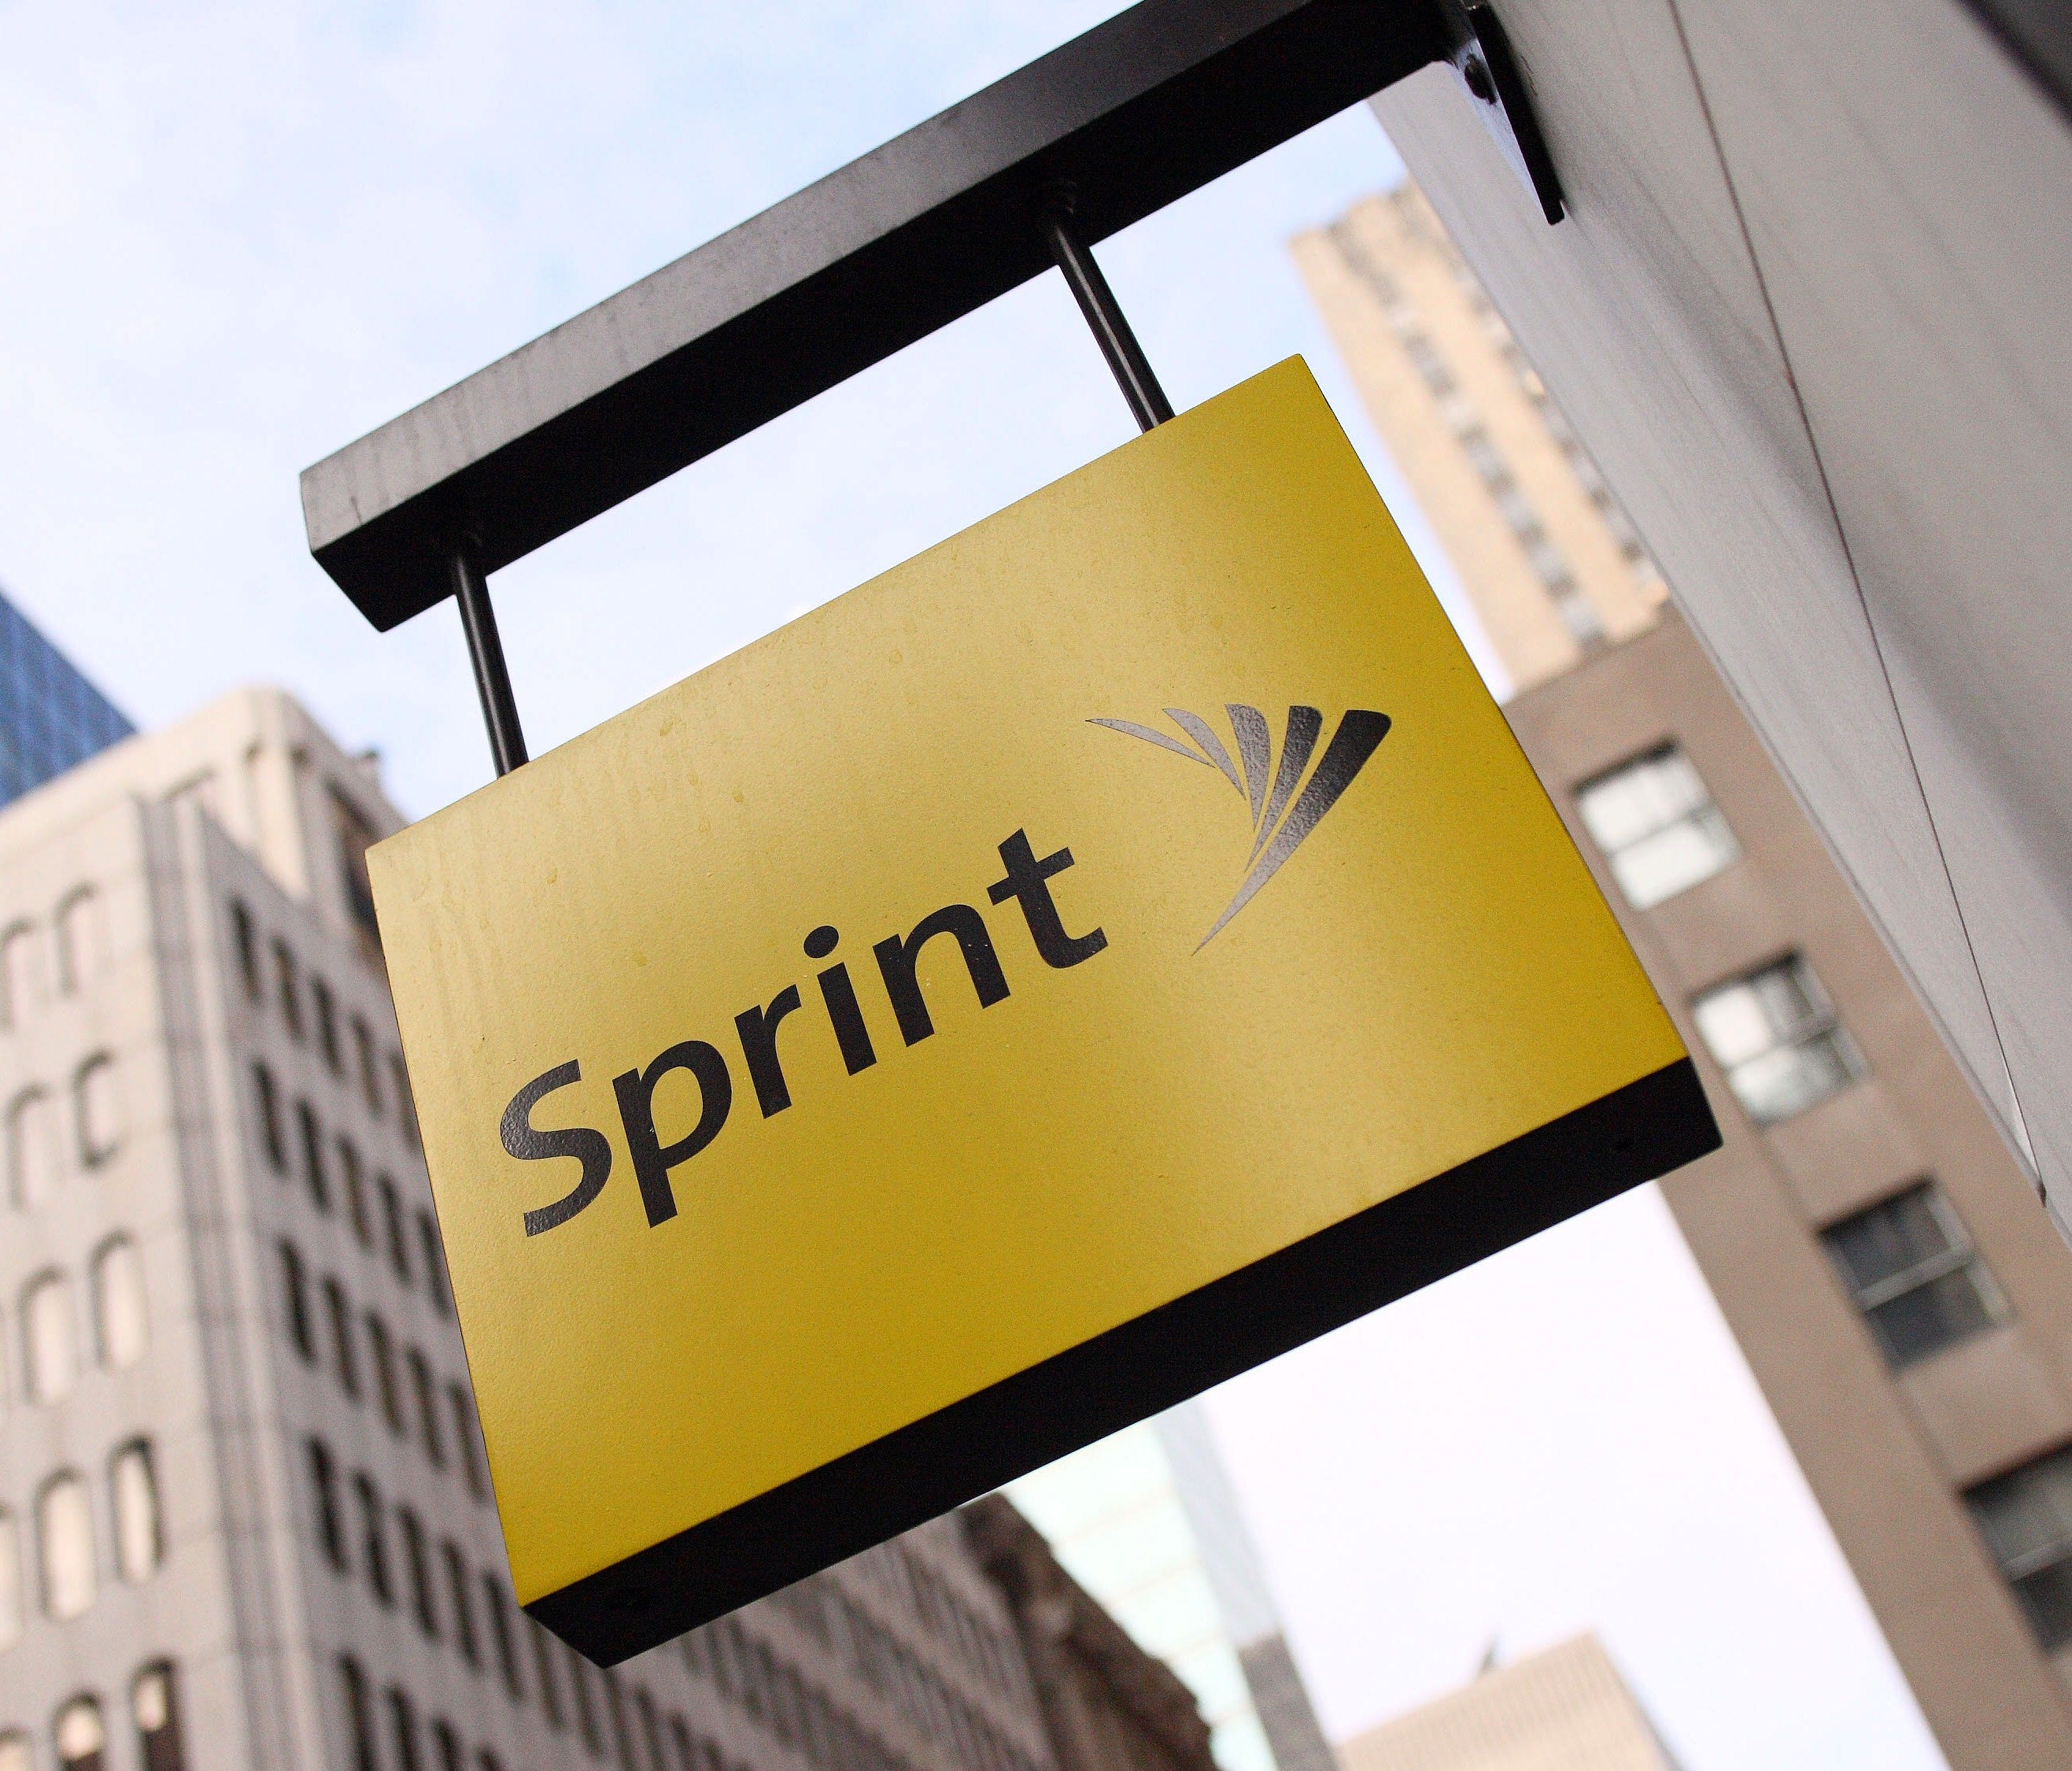 Sprint opened a pop-up store next to a Verizon retailer to compete directly with the cell phone provider.